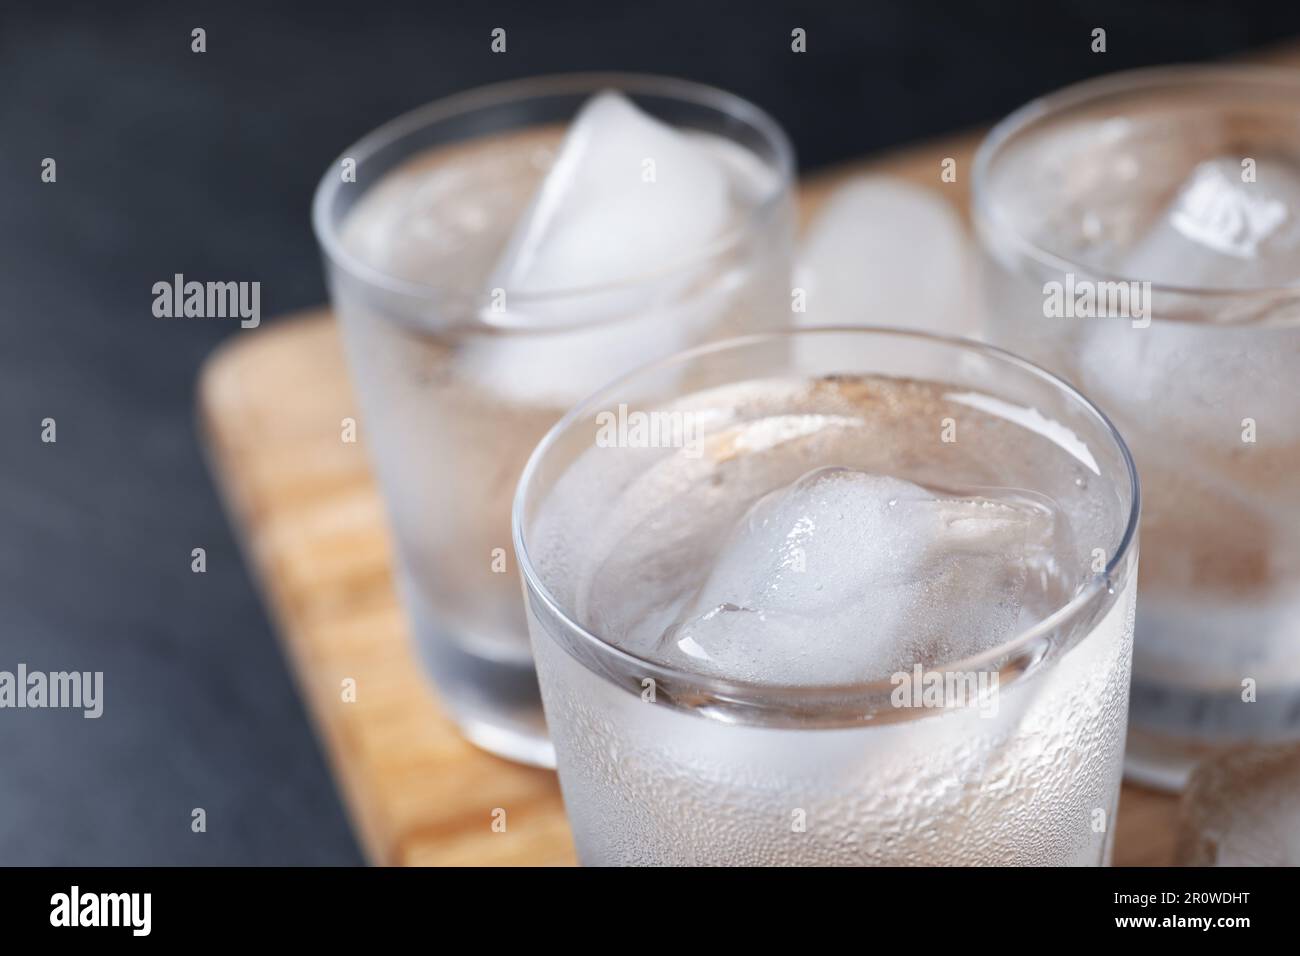 Shot glasses of vodka with ice cubes on table, closeup Stock Photo